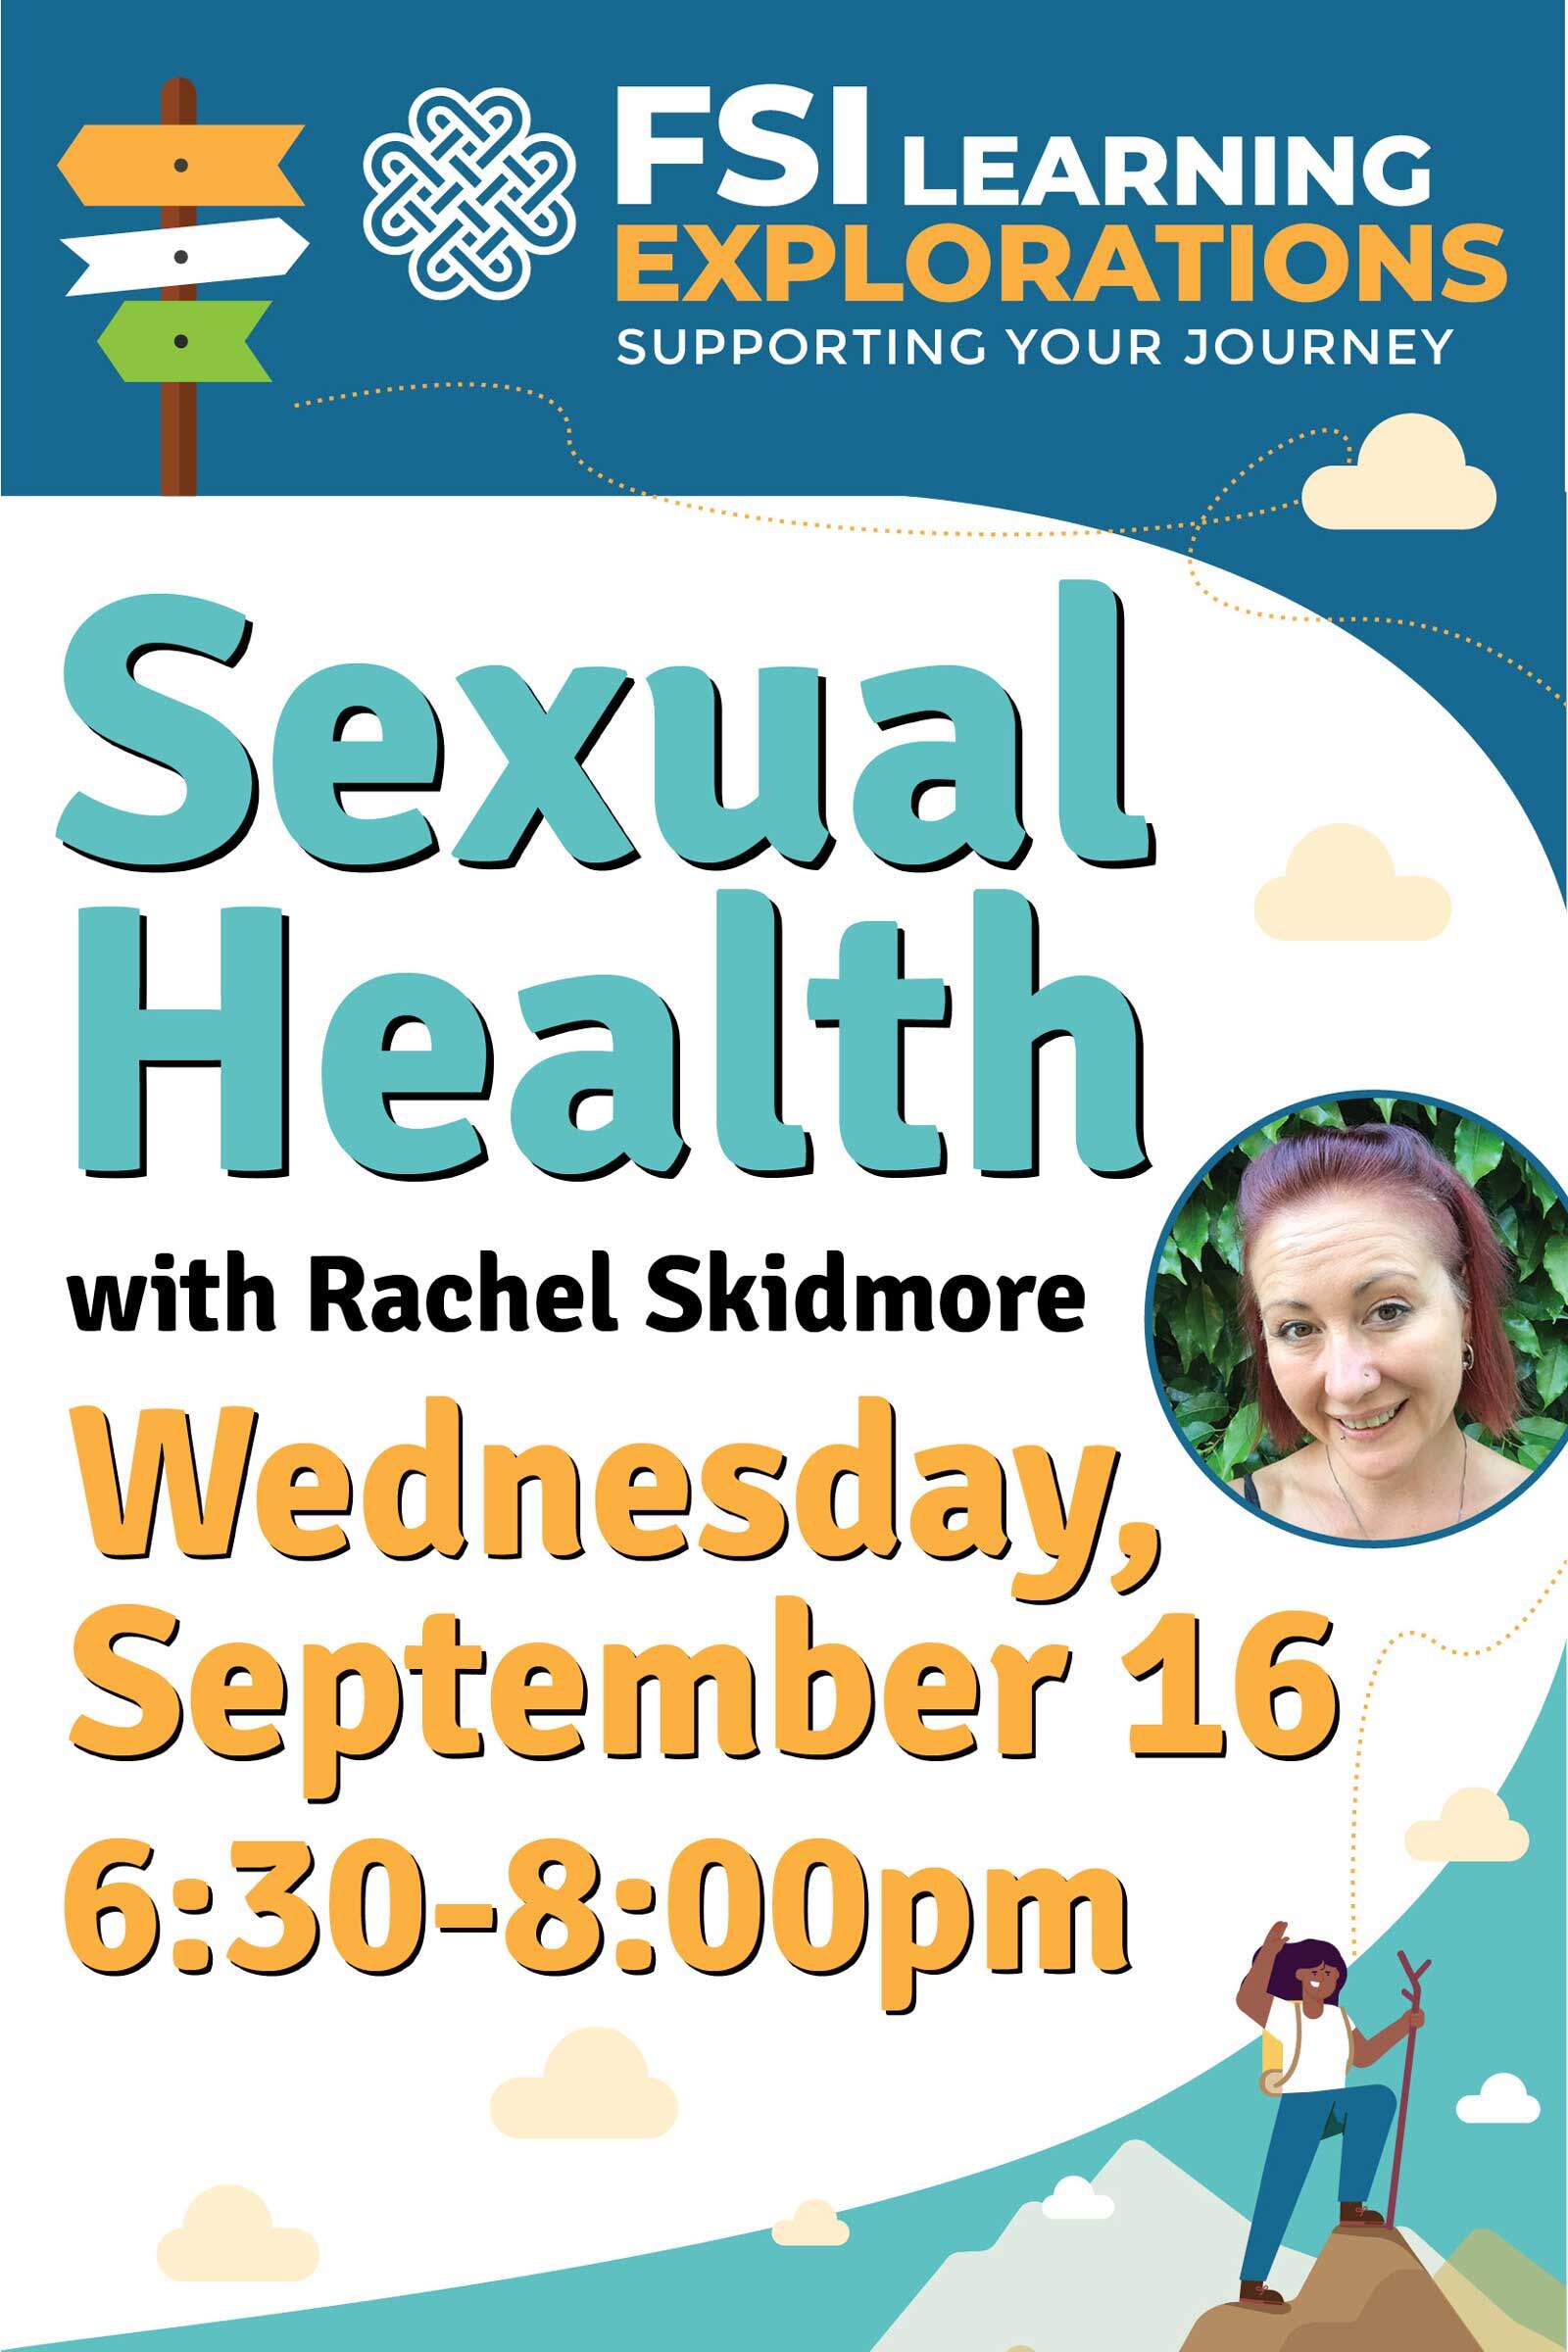 FSI Learning Explorations - Sexual Health